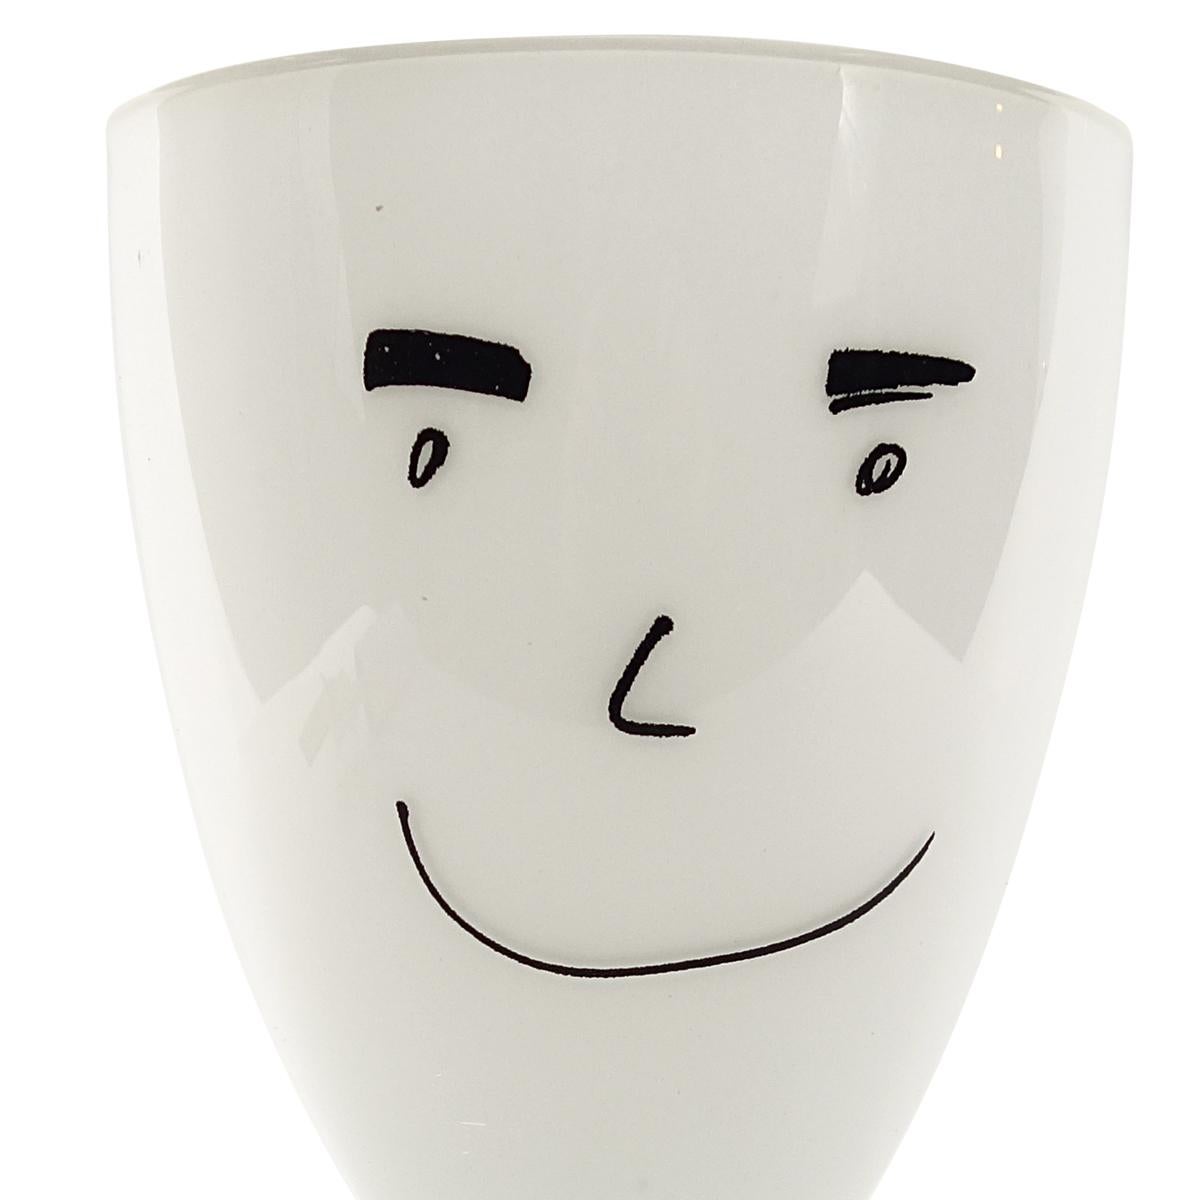 Cheerful glass vase designed by Roger Selden for the Vis-à-vis Collection of Ritzenhoff, 1999.

This black and white vase from the Vis-à-vis Collection has a stylized cartoon character painted on it. It is highly inviting to put in a wild bunch of